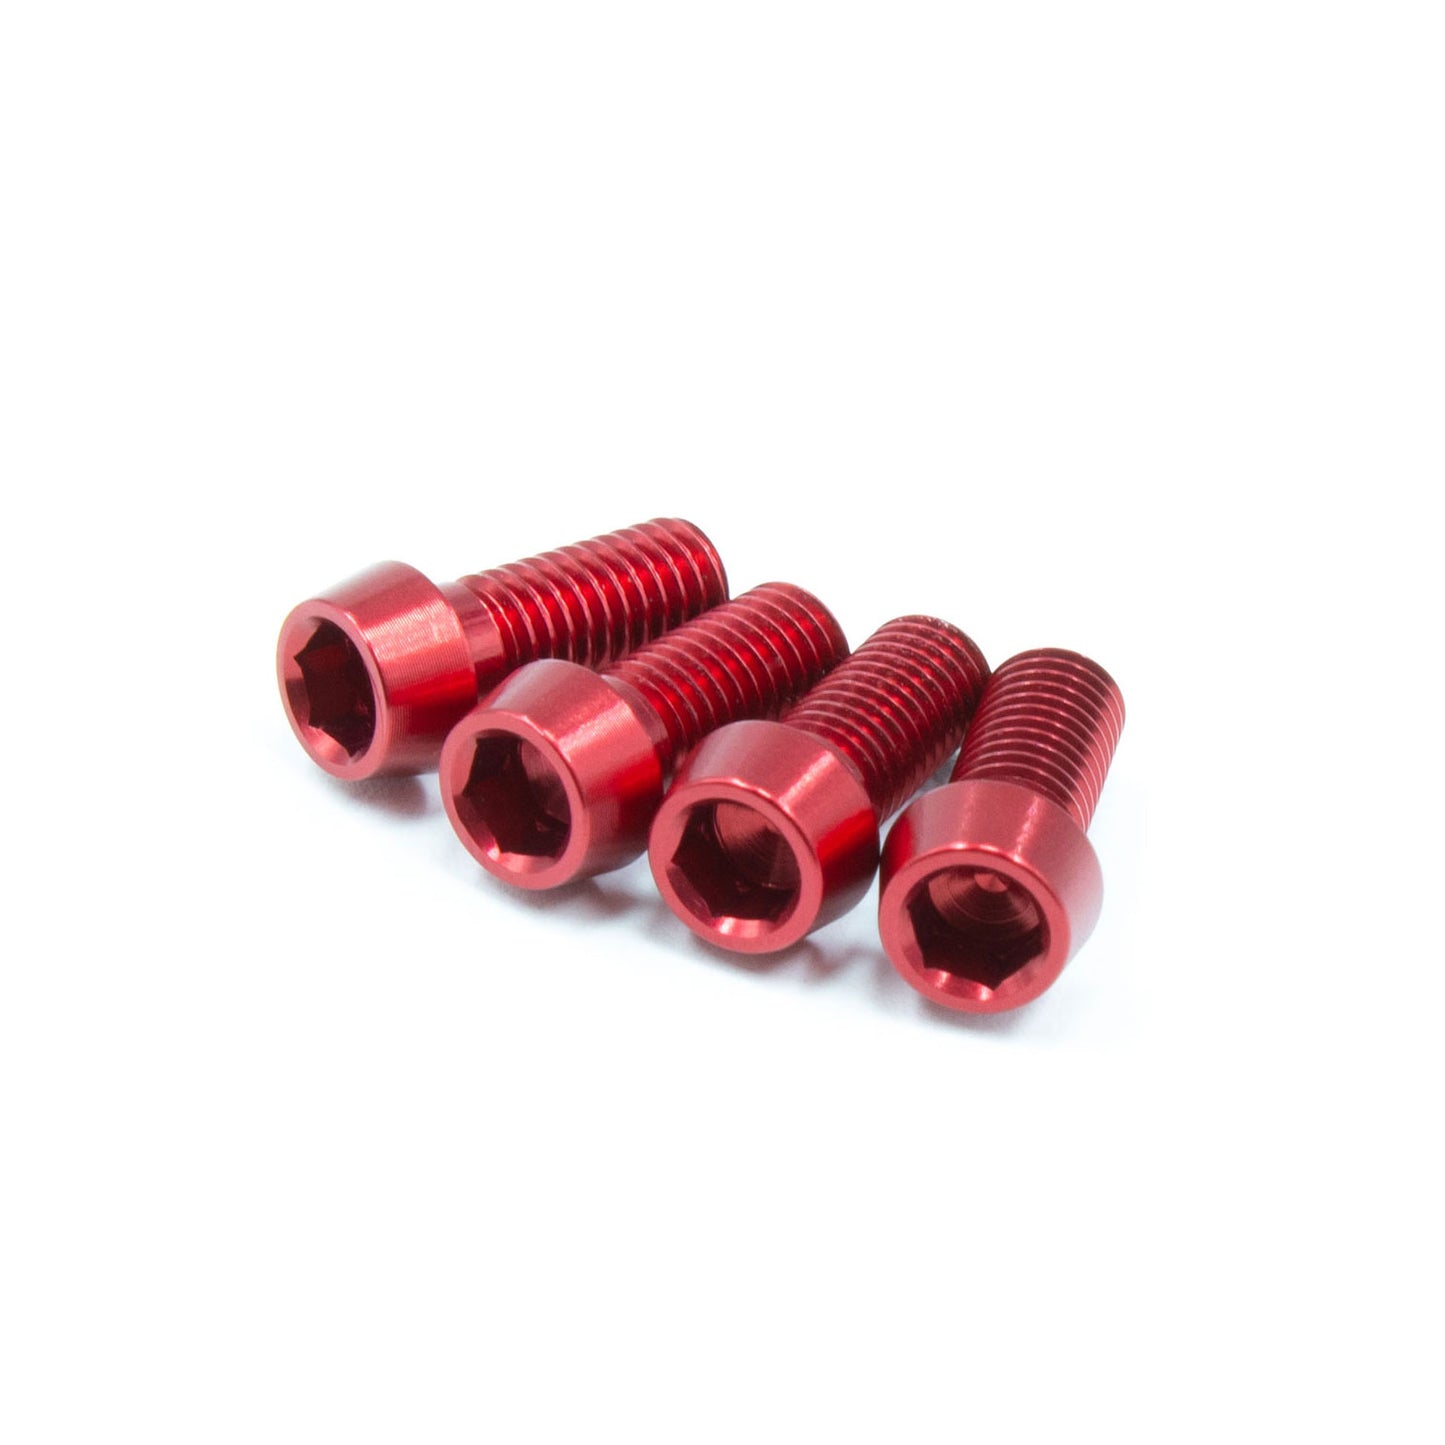 Red, ultra lightweight set of bolts for bicycle bottle cages